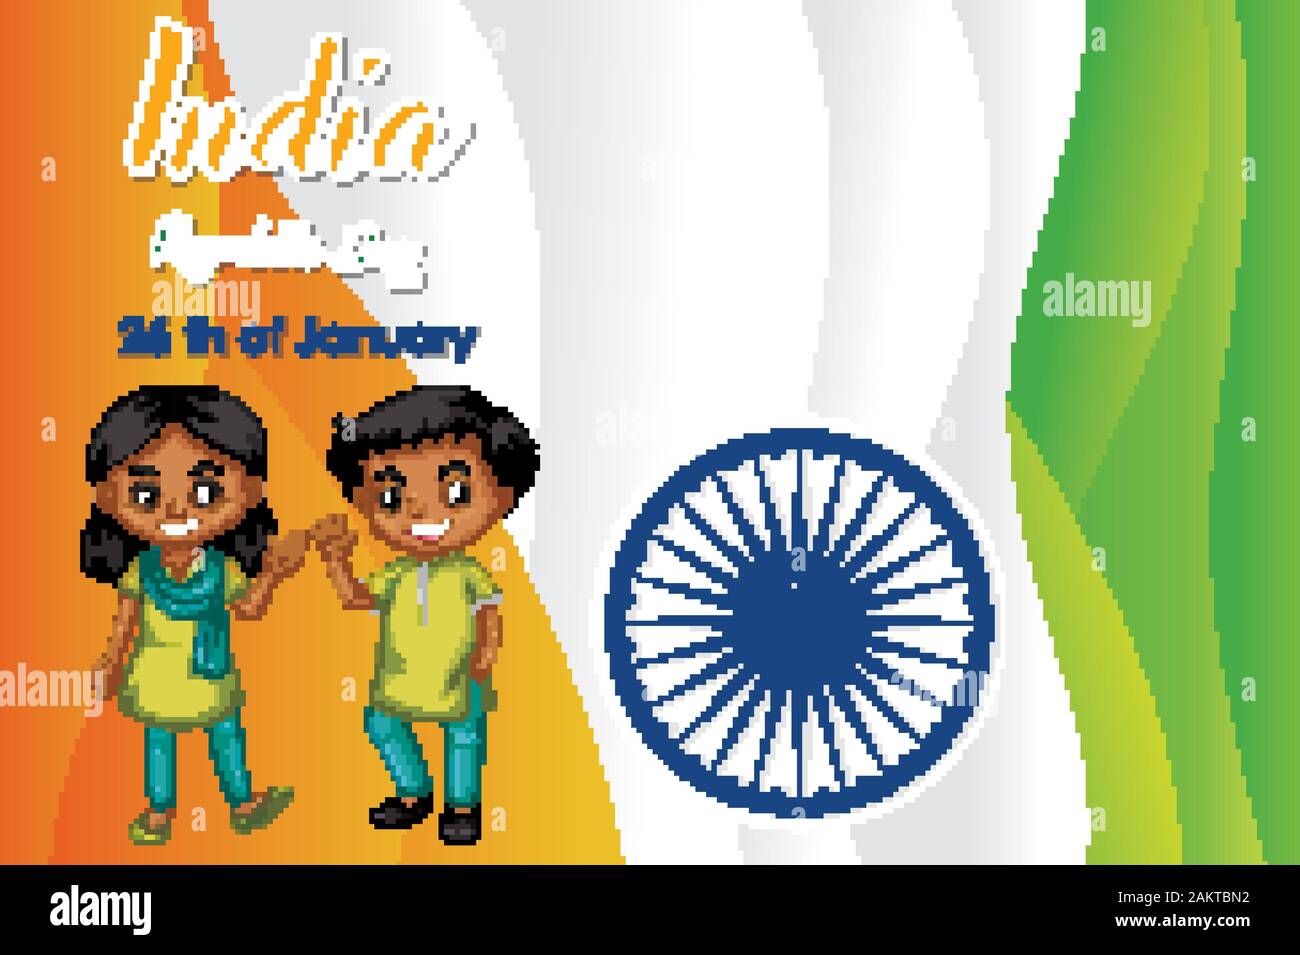 India Republic Day Poster Design With Two Happy Kids Illustration Stock Vector Image Art Alamy Vector illustration poland independence day, polish flag in trendy grunge style. alamy